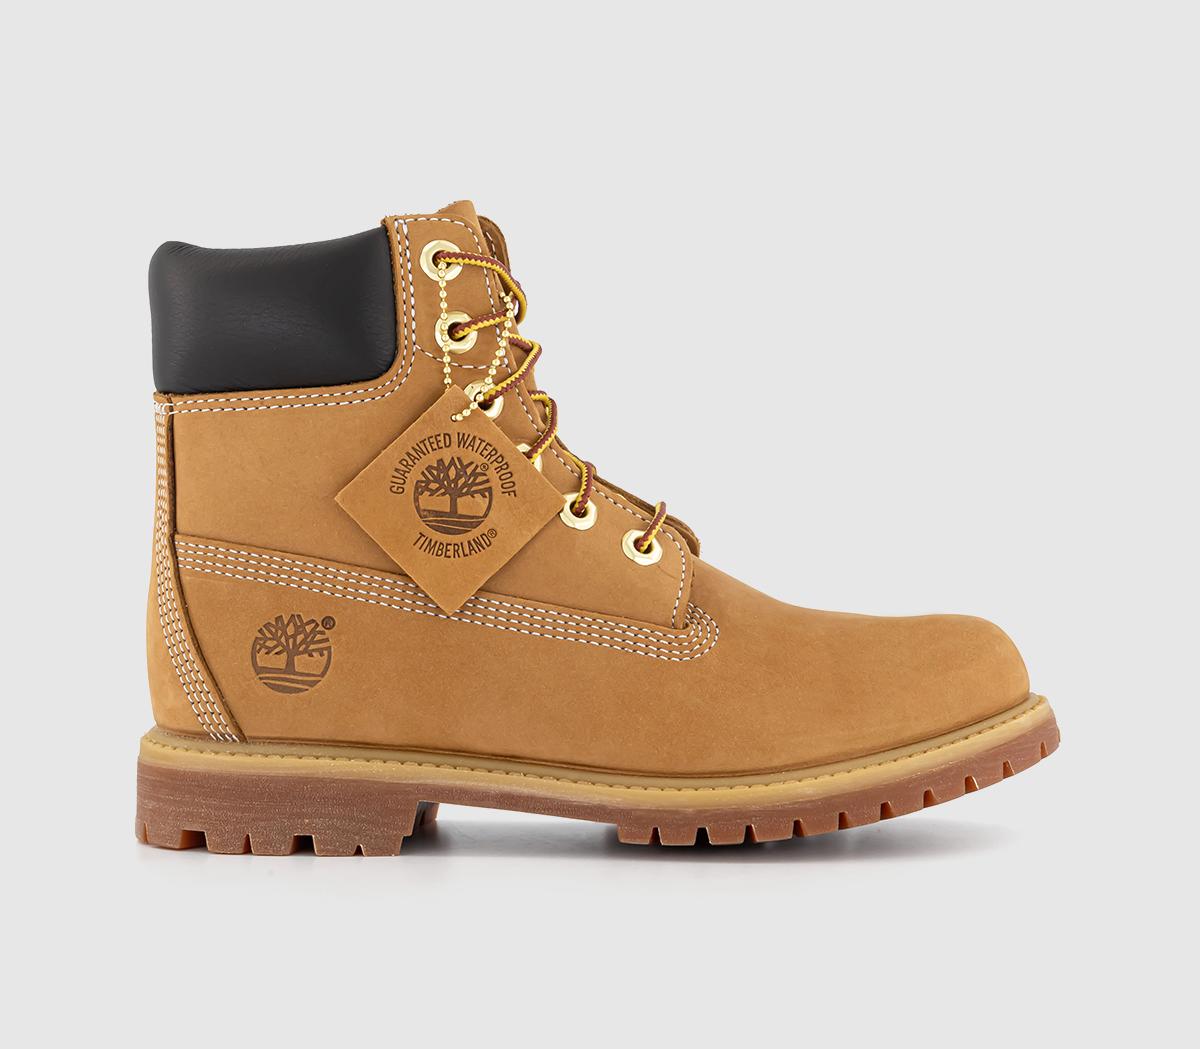 Timberland Premium 6 Inch Boots F Wheat Nubuck - Women's Ankle Boots